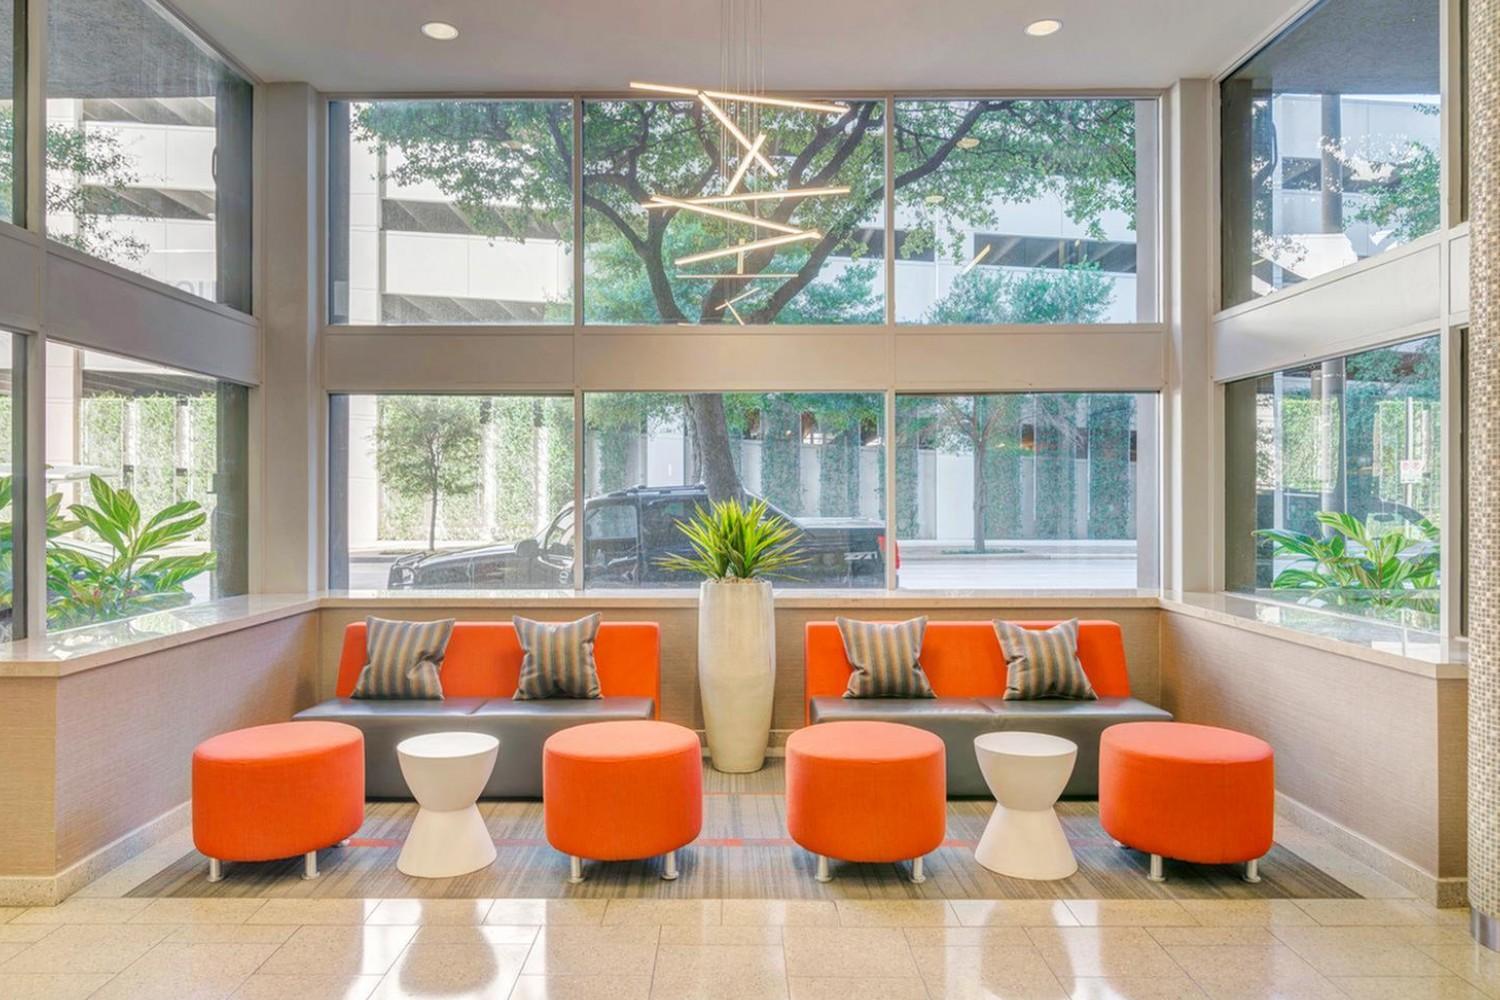 Leasing office lobby with sofas